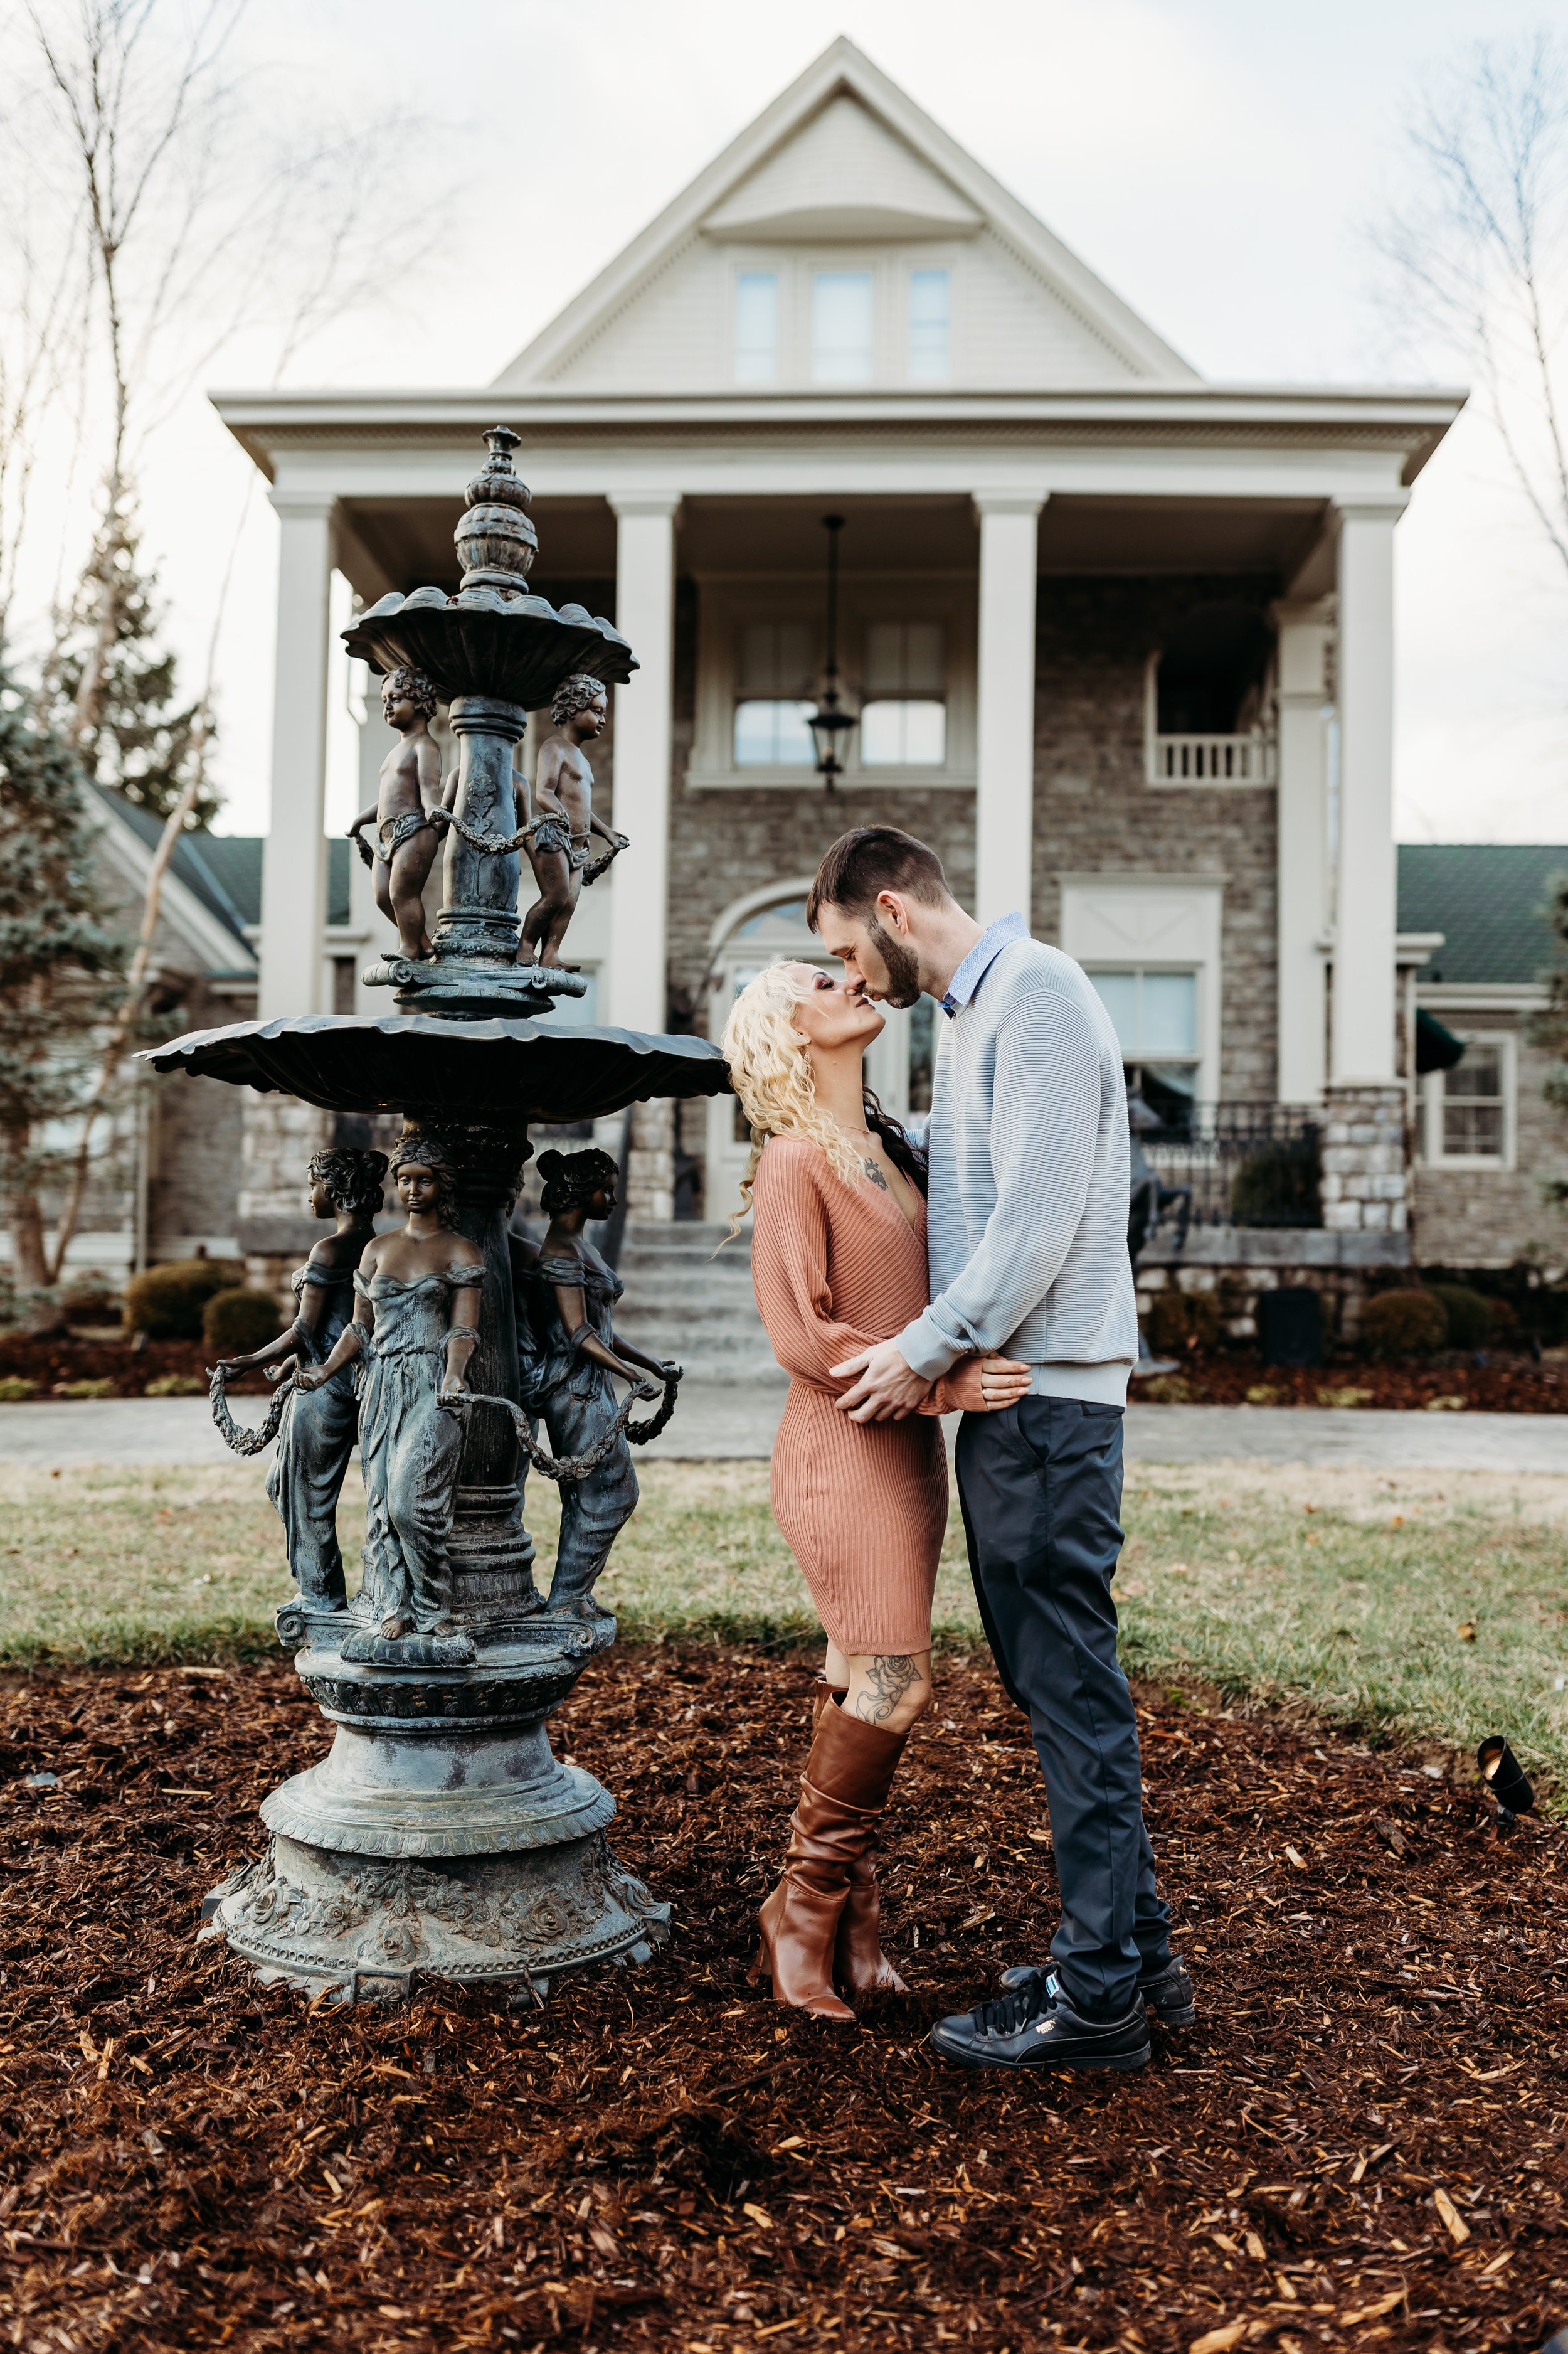  Engagement session at cpuples' home and property. Louisville, Kwntucky engagement photographer. 